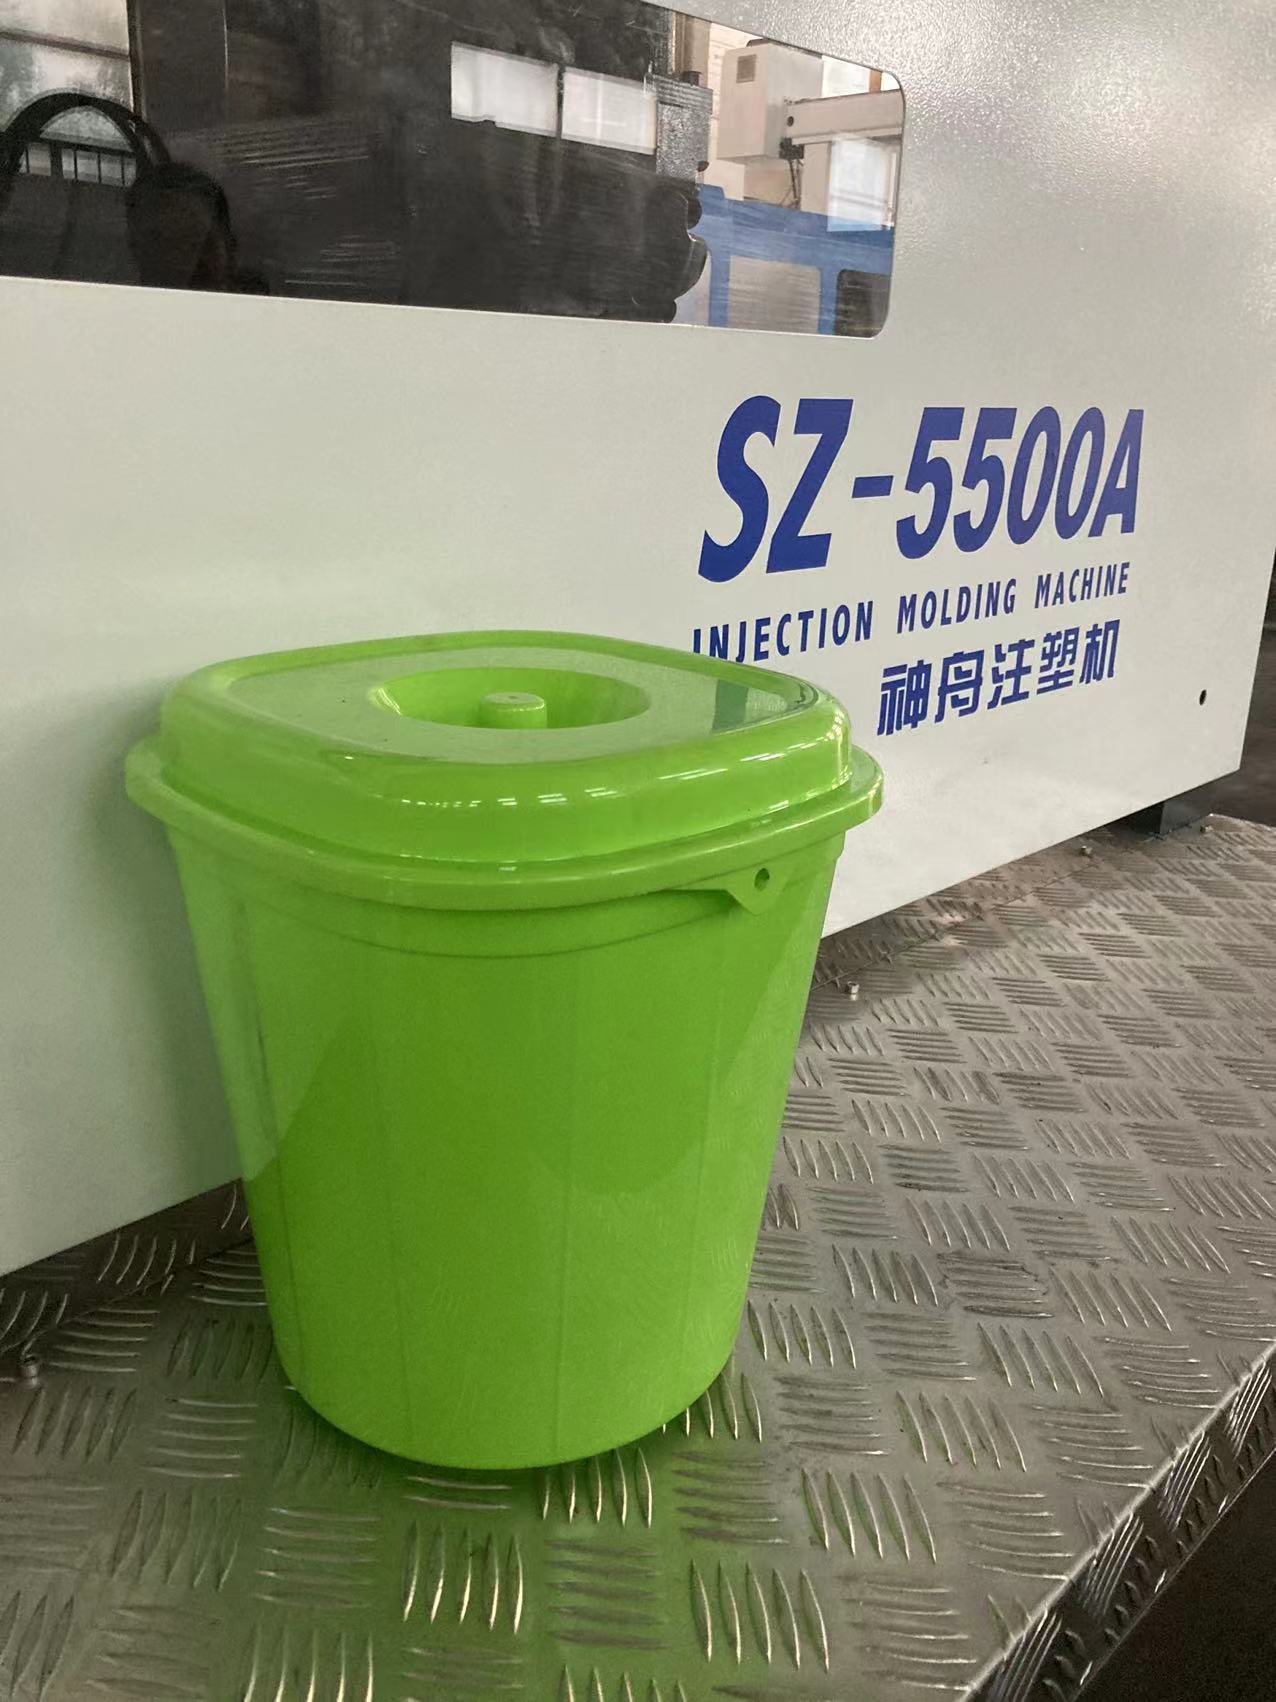 Plastic Bucket Trash Can Small Injection Molding Machine